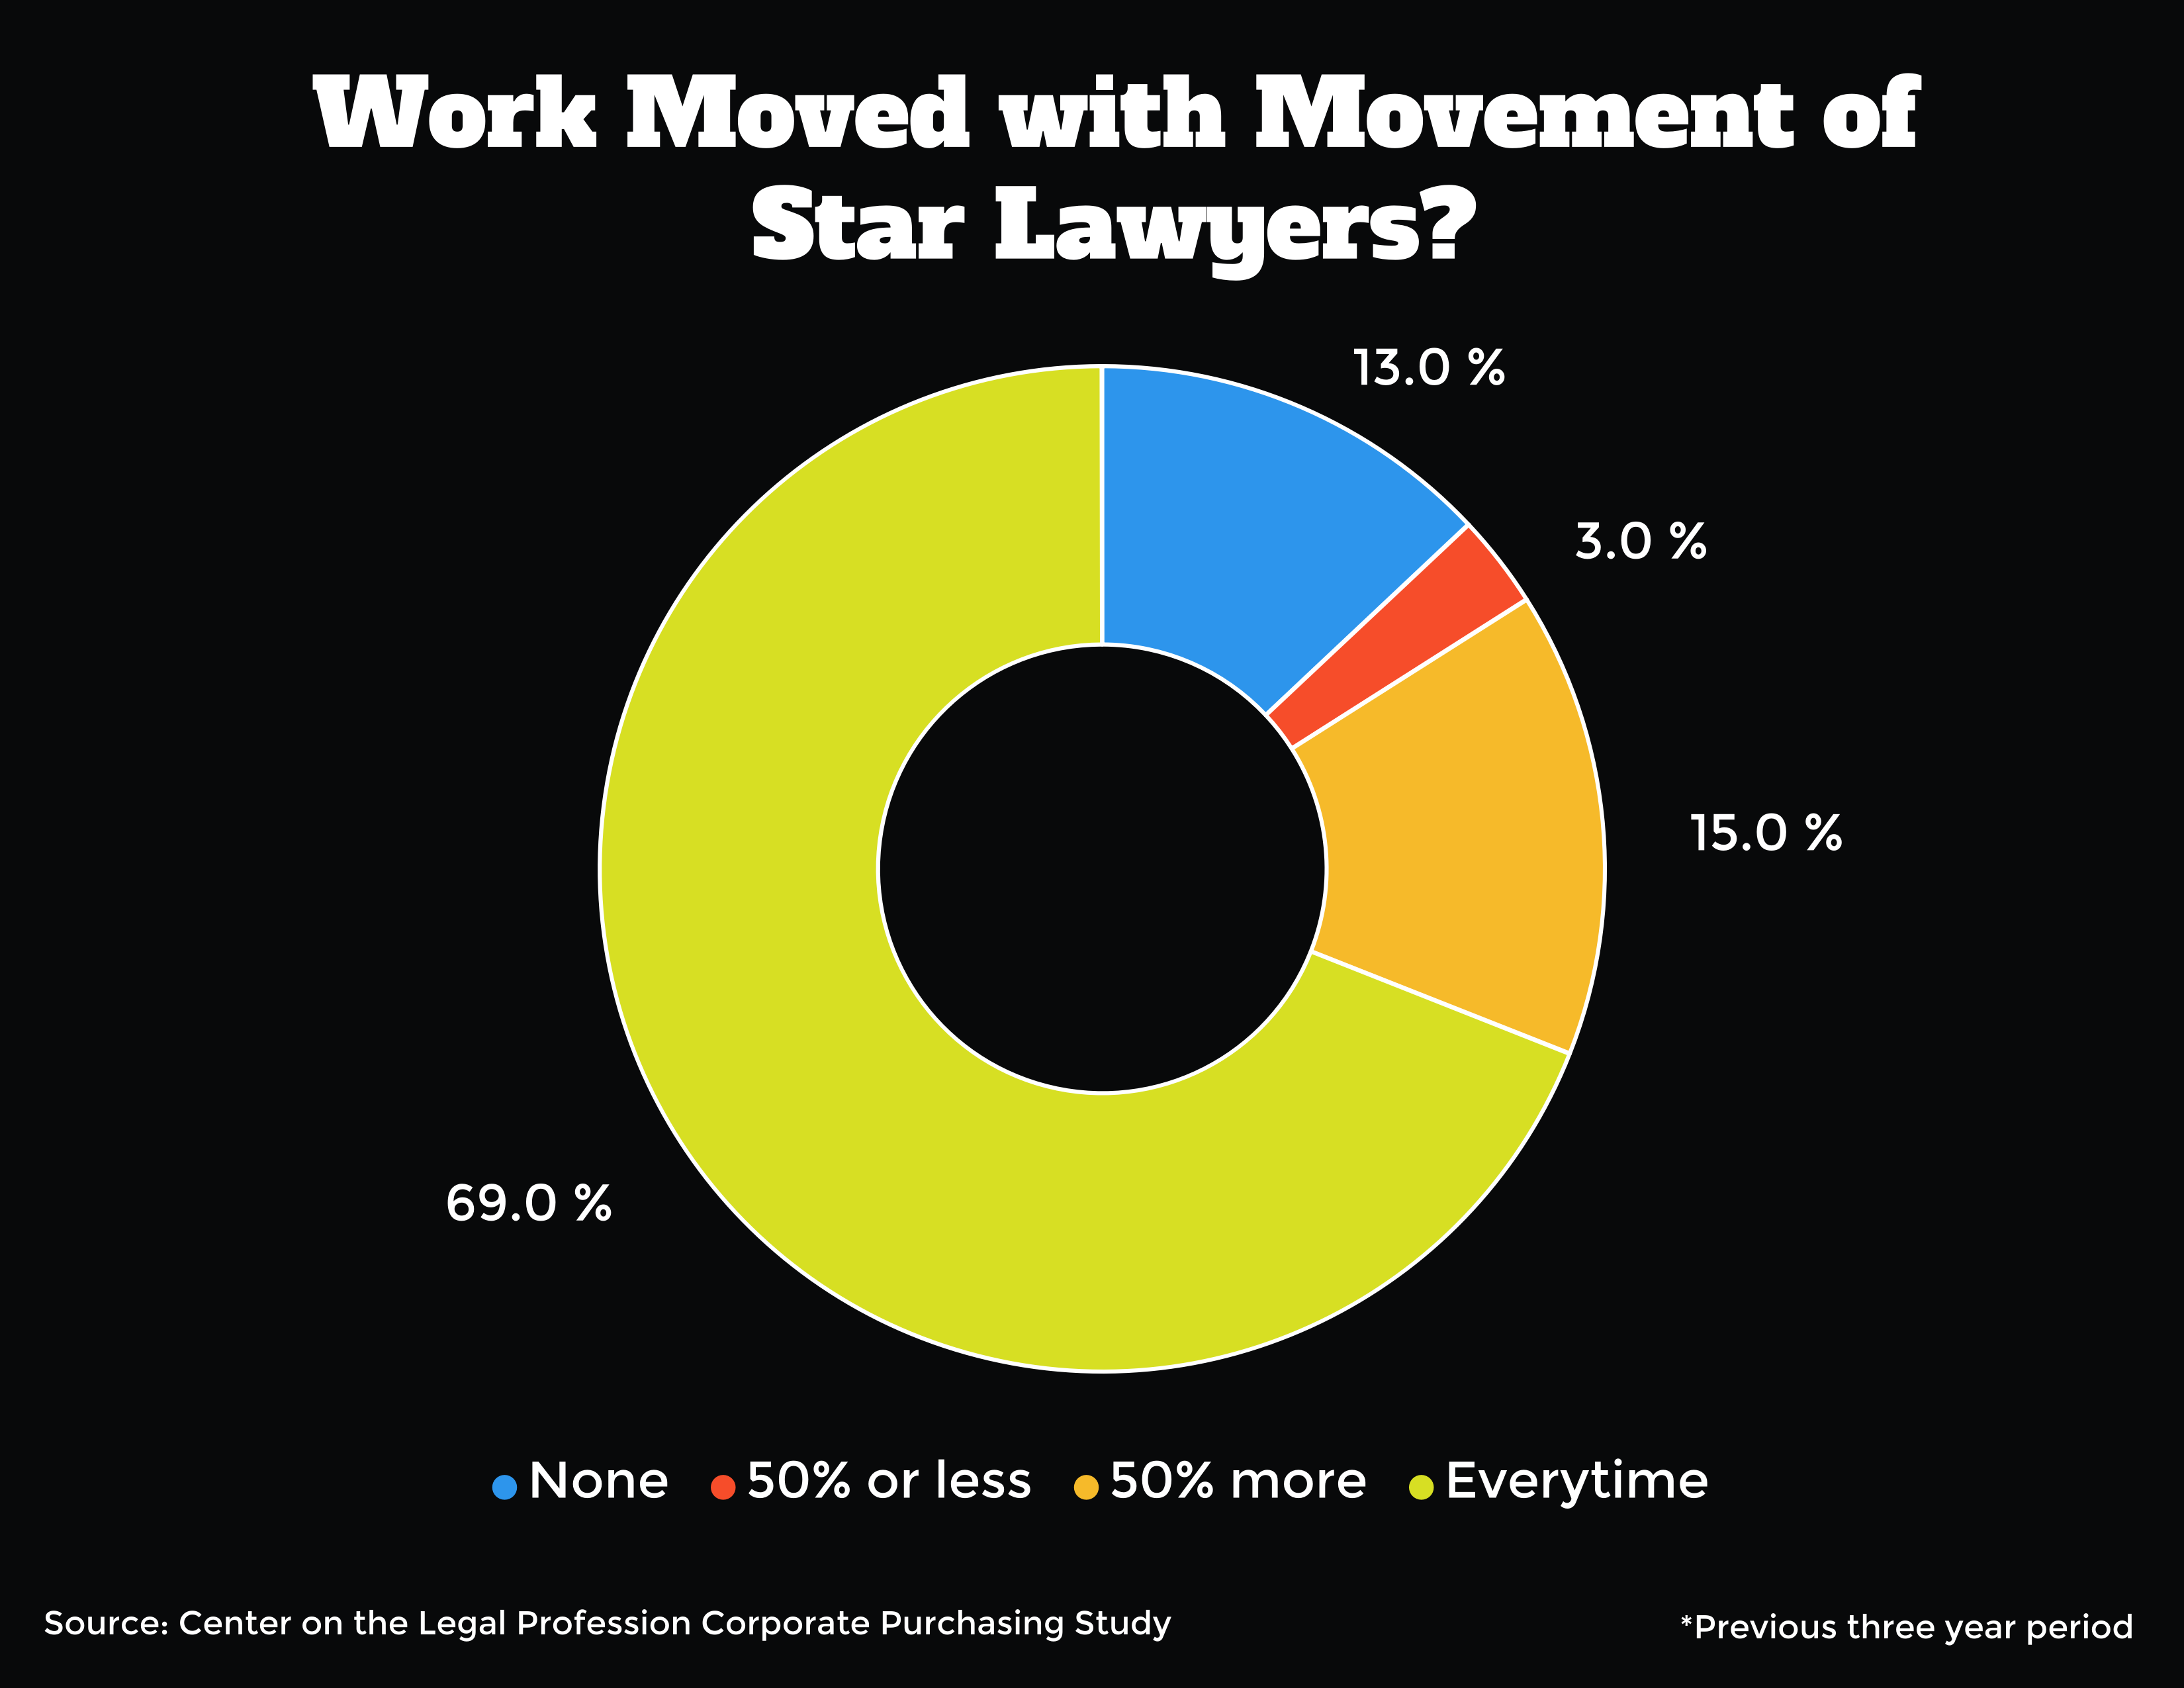 Chart that shows how often work moved with movement of star lawyers: 13% none; 3% say 50% or less; 15% sat 50% or more; and 69% say everytime.